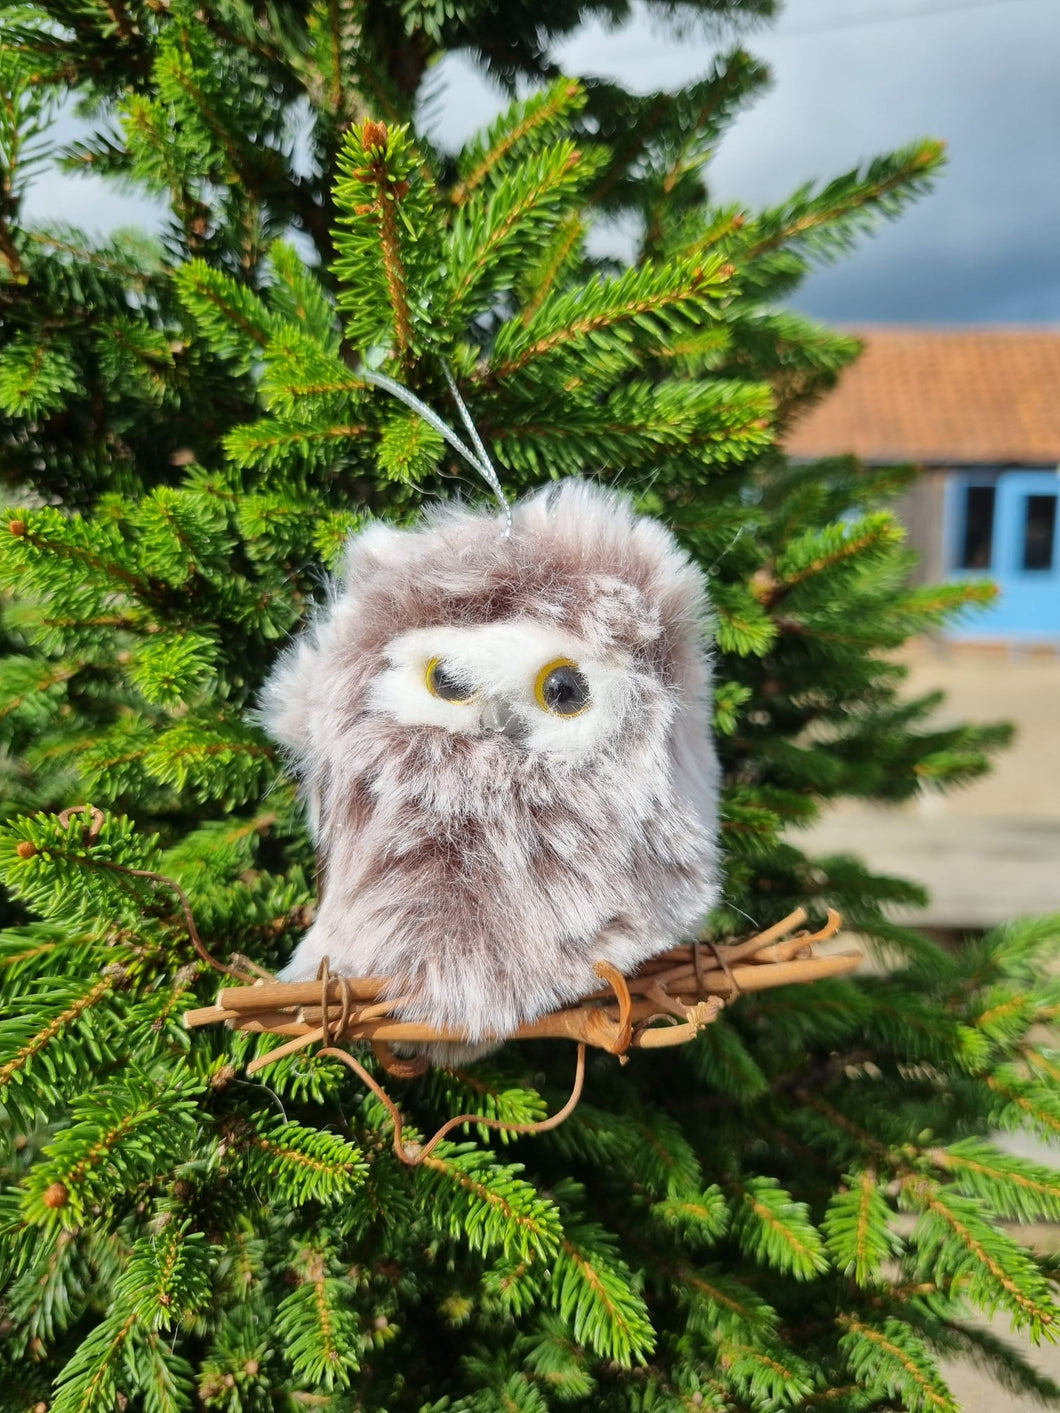 Fluffy owl on branch - hanging Christmas Tree decoration